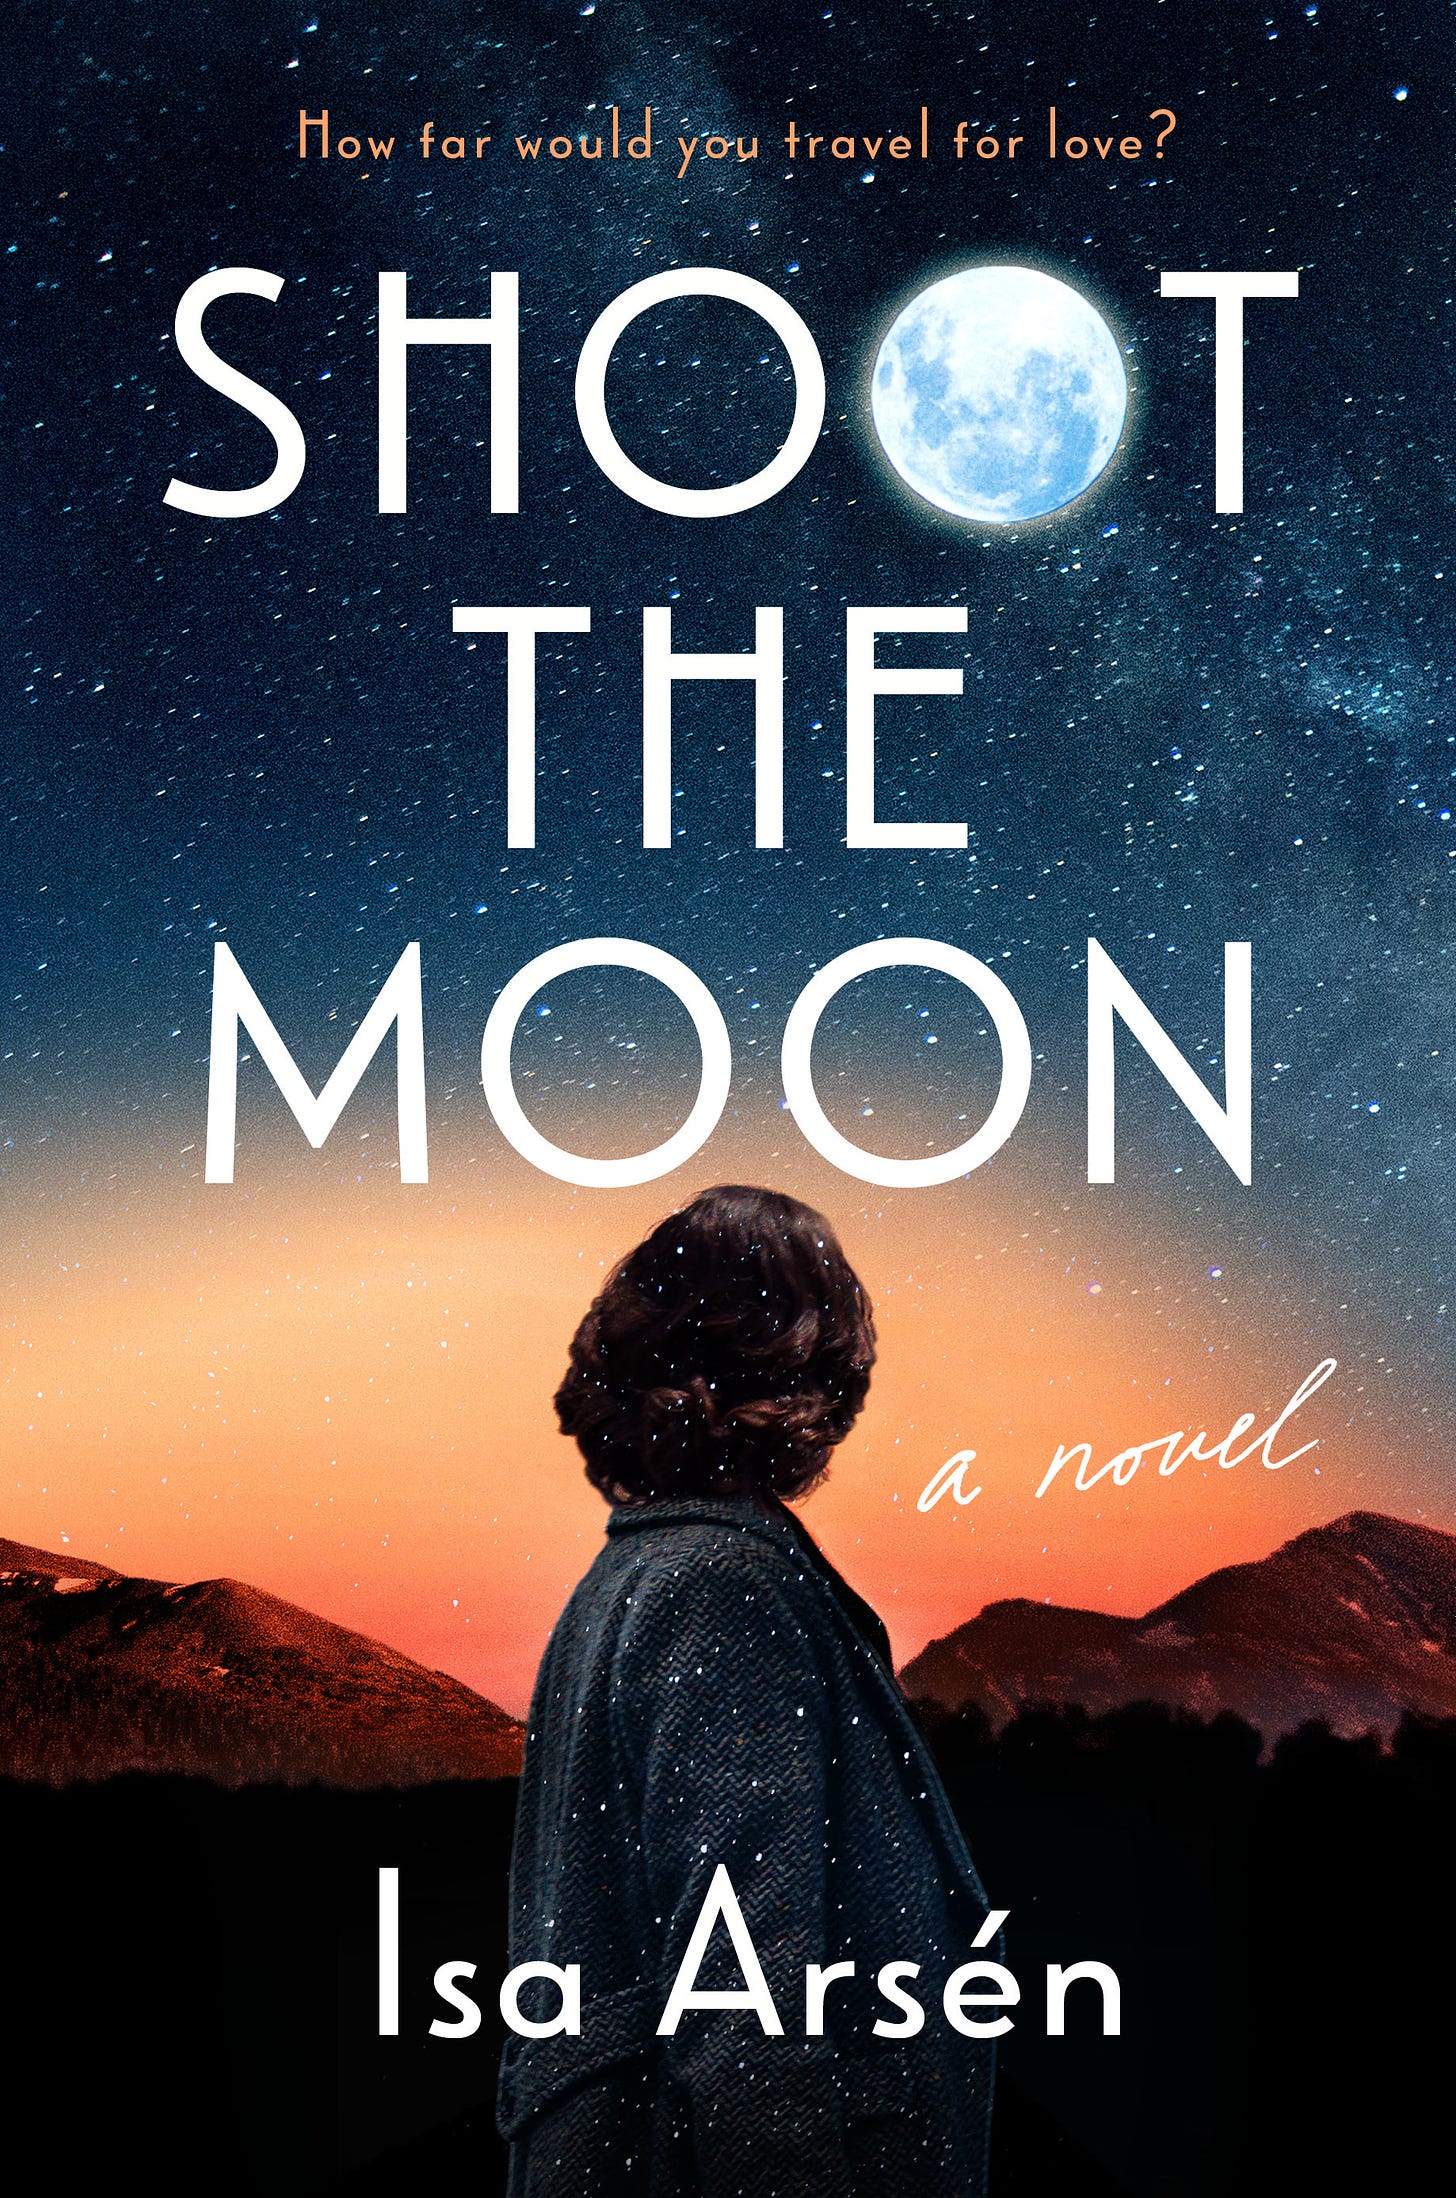 the cover of the new novel SHOOT THE MOON - a woman looks out at the full moon rising above the New Mexico mountains.